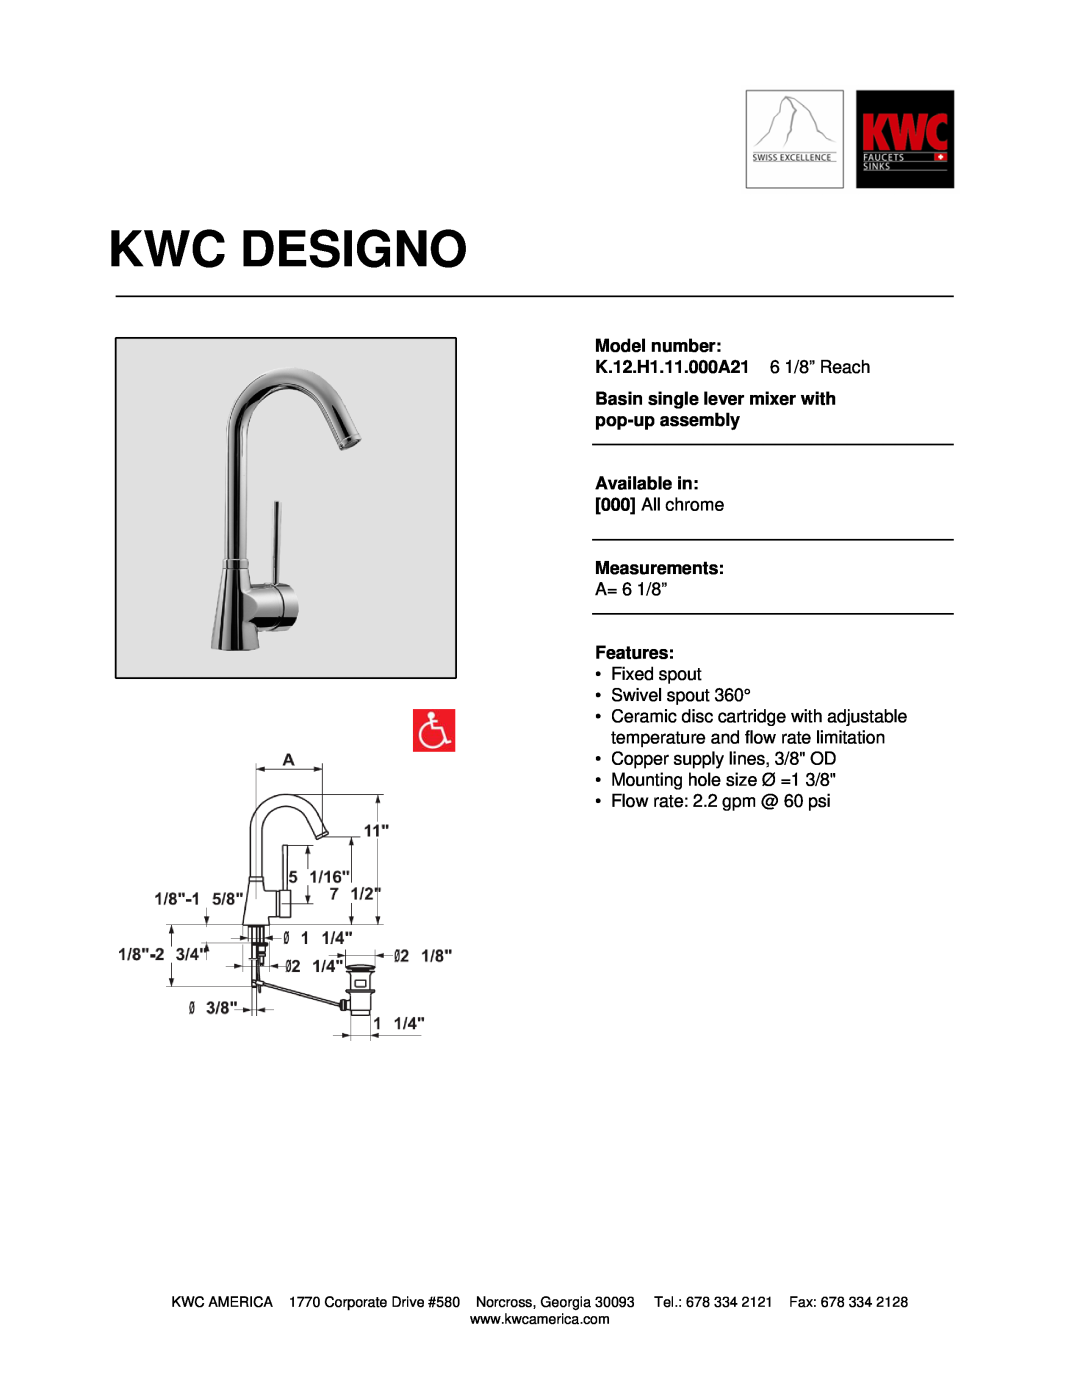 KWC manual Kwc Designo, Model number K.12.H1.11.000A21 6 1/8” Reach, Basin single lever mixer with pop-upassembly 